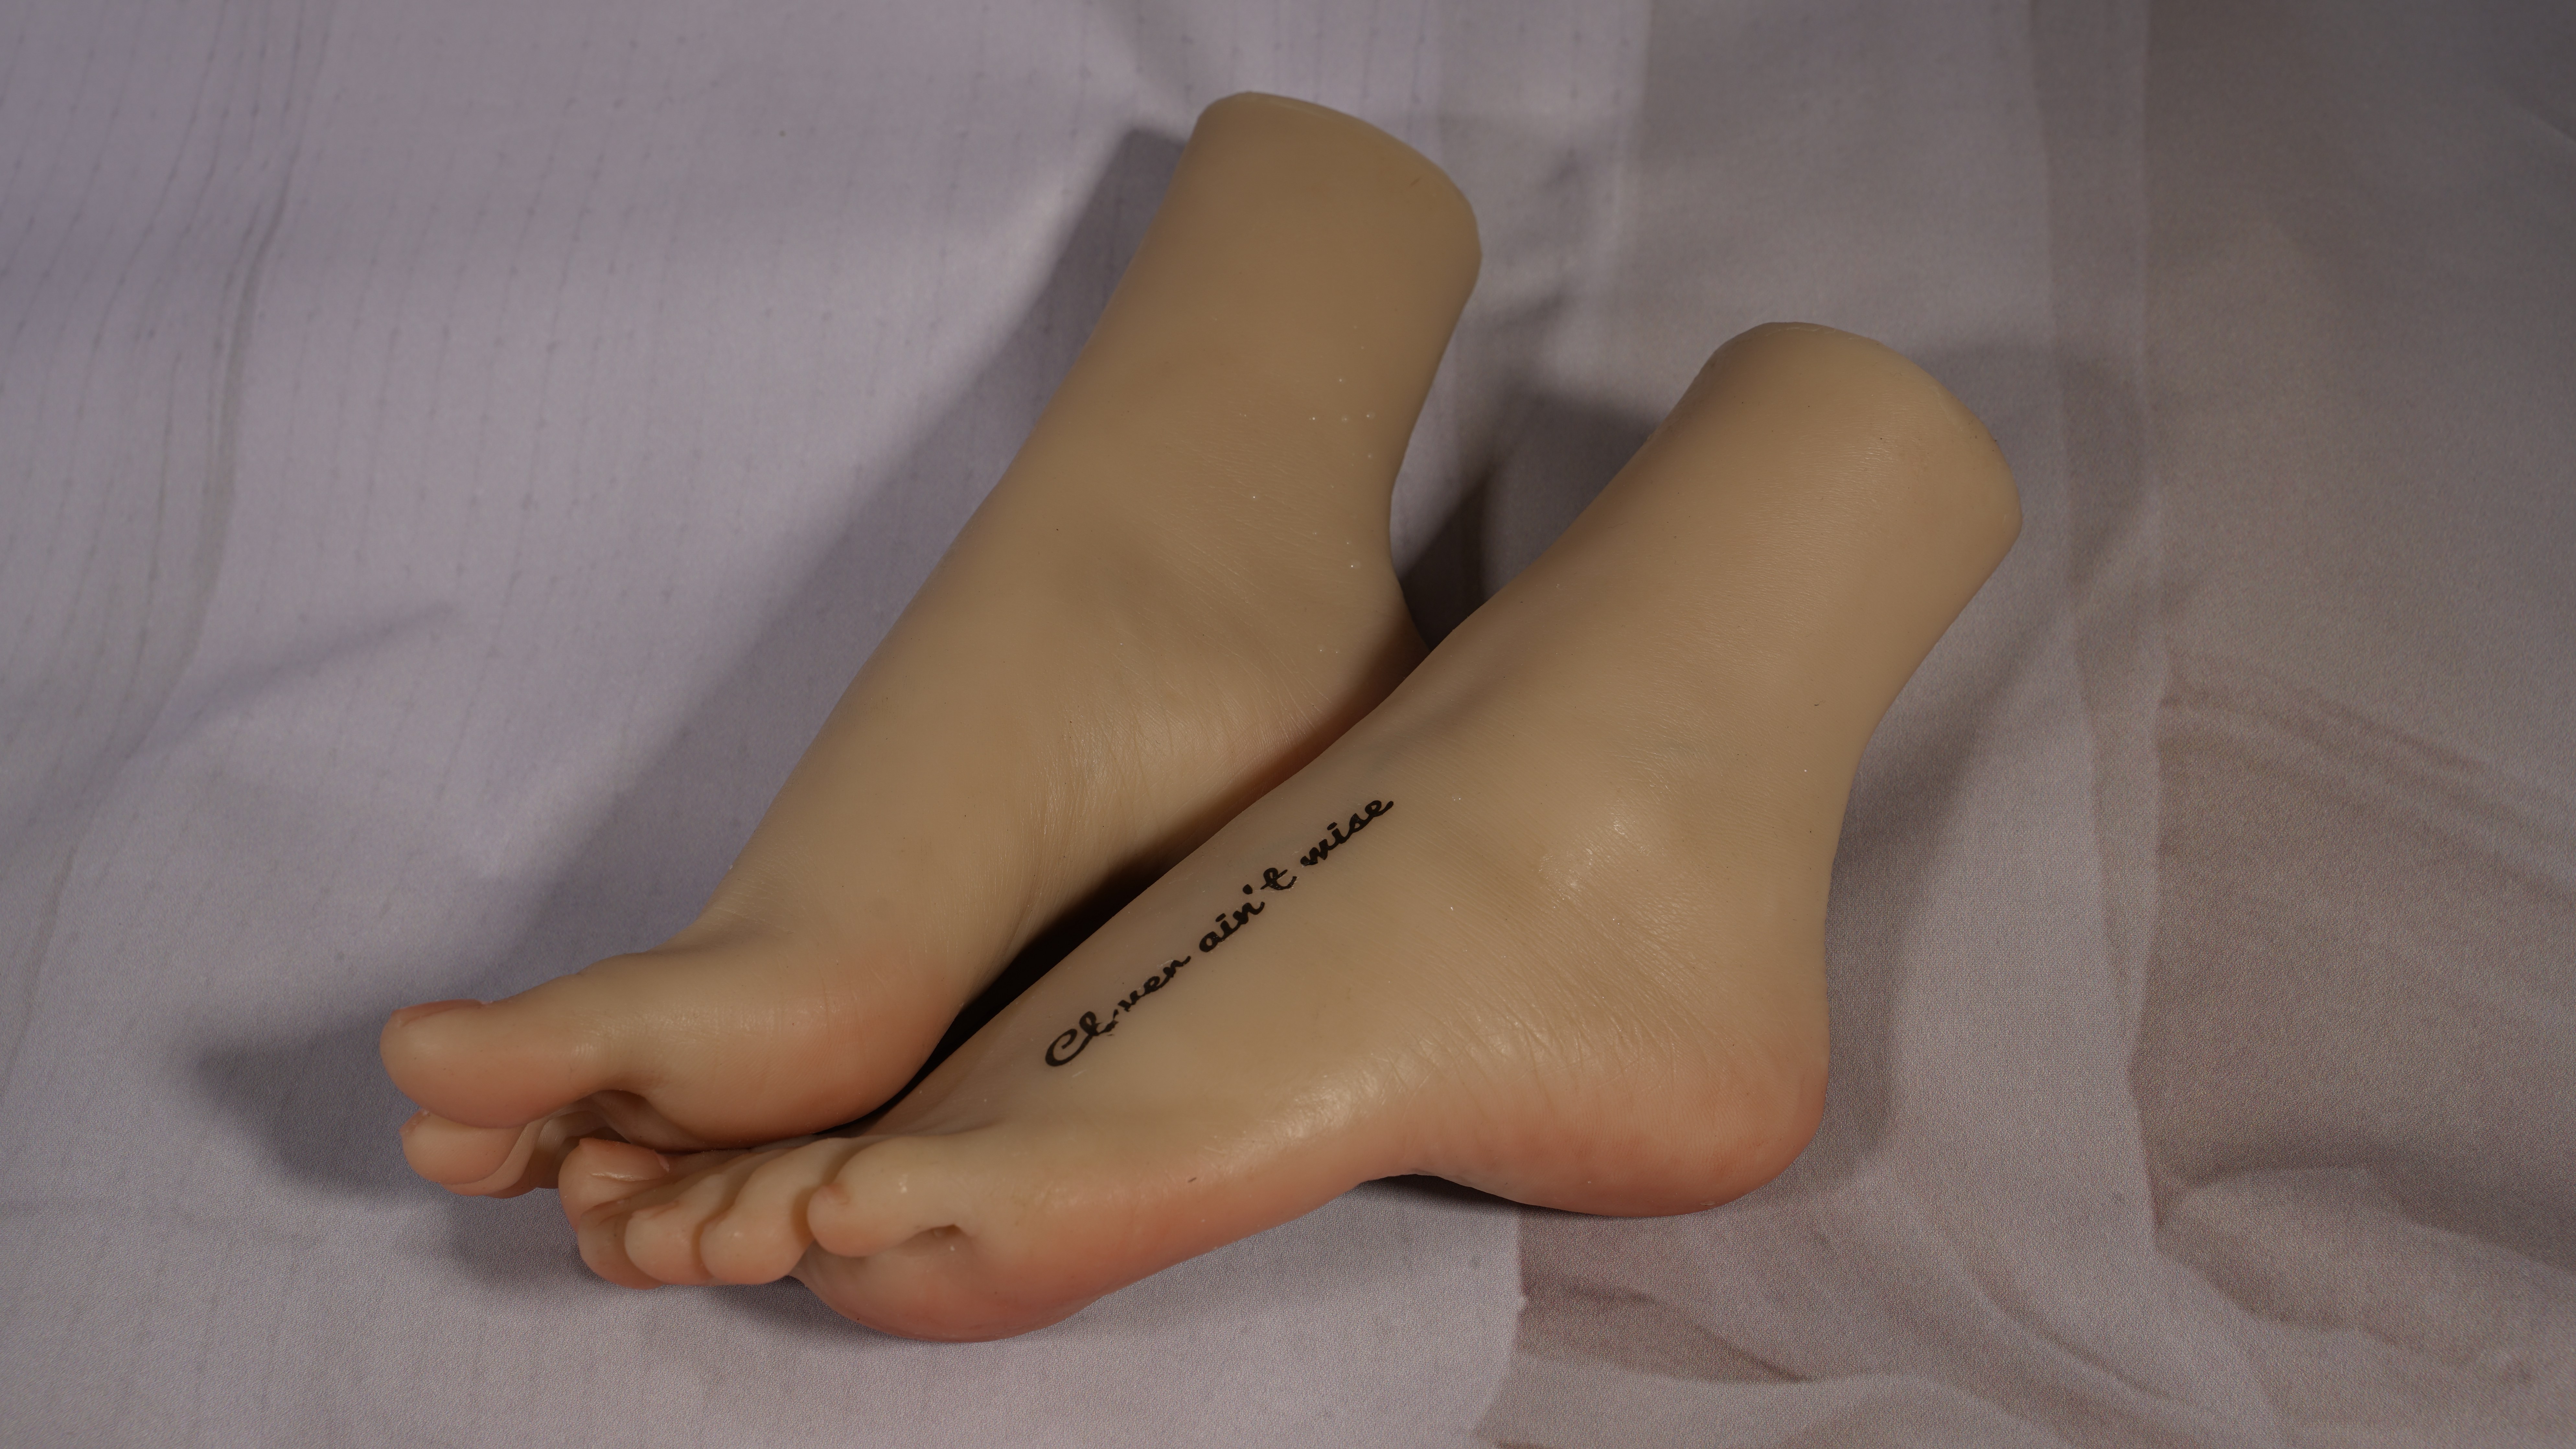 With Display Silicone Feet One Or Female Legs Bone Model Lifelike Left Right 